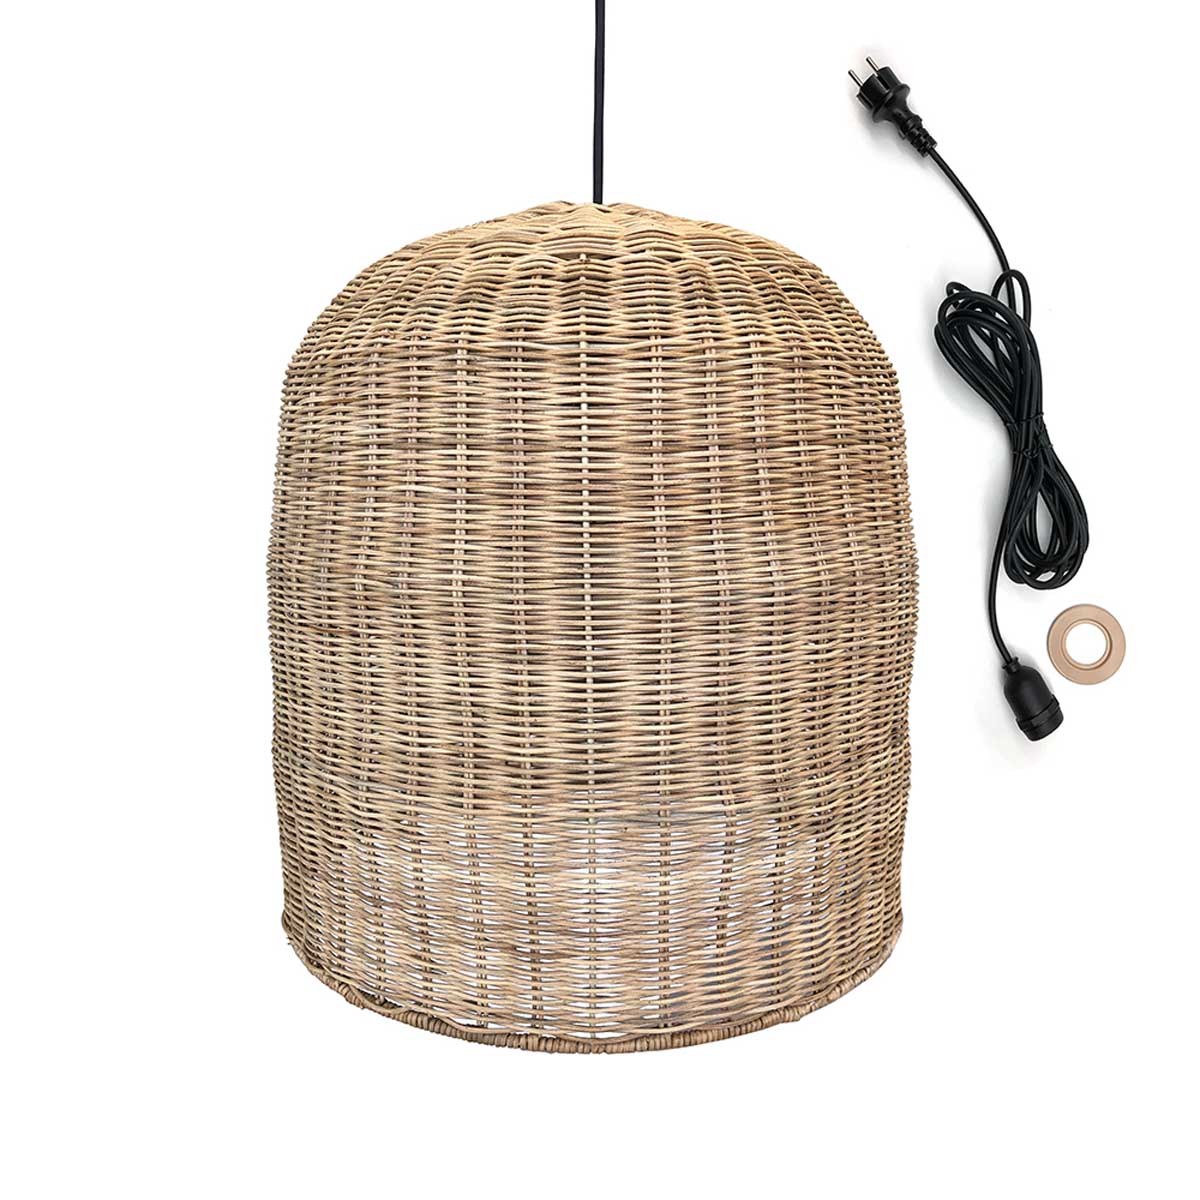 Mains-powered suspension for outdoors GIACOMO OUTDOOR CABLE in natural rattan bohemian style 5m cable length